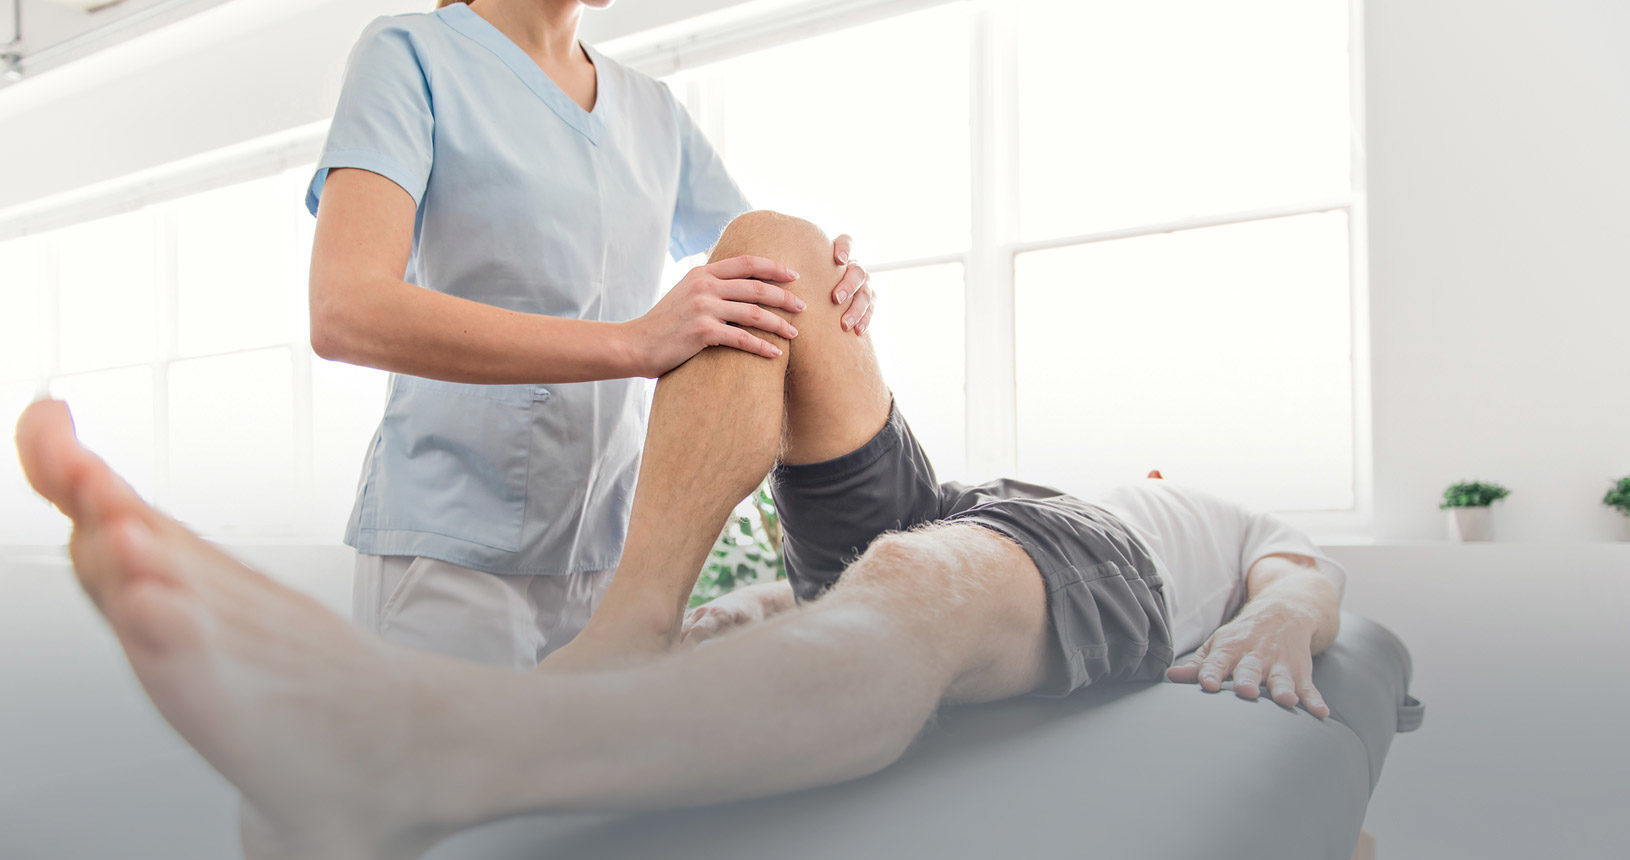 How Can Sports Physical Therapy Help You Avoid Surgery (After An Injury)?